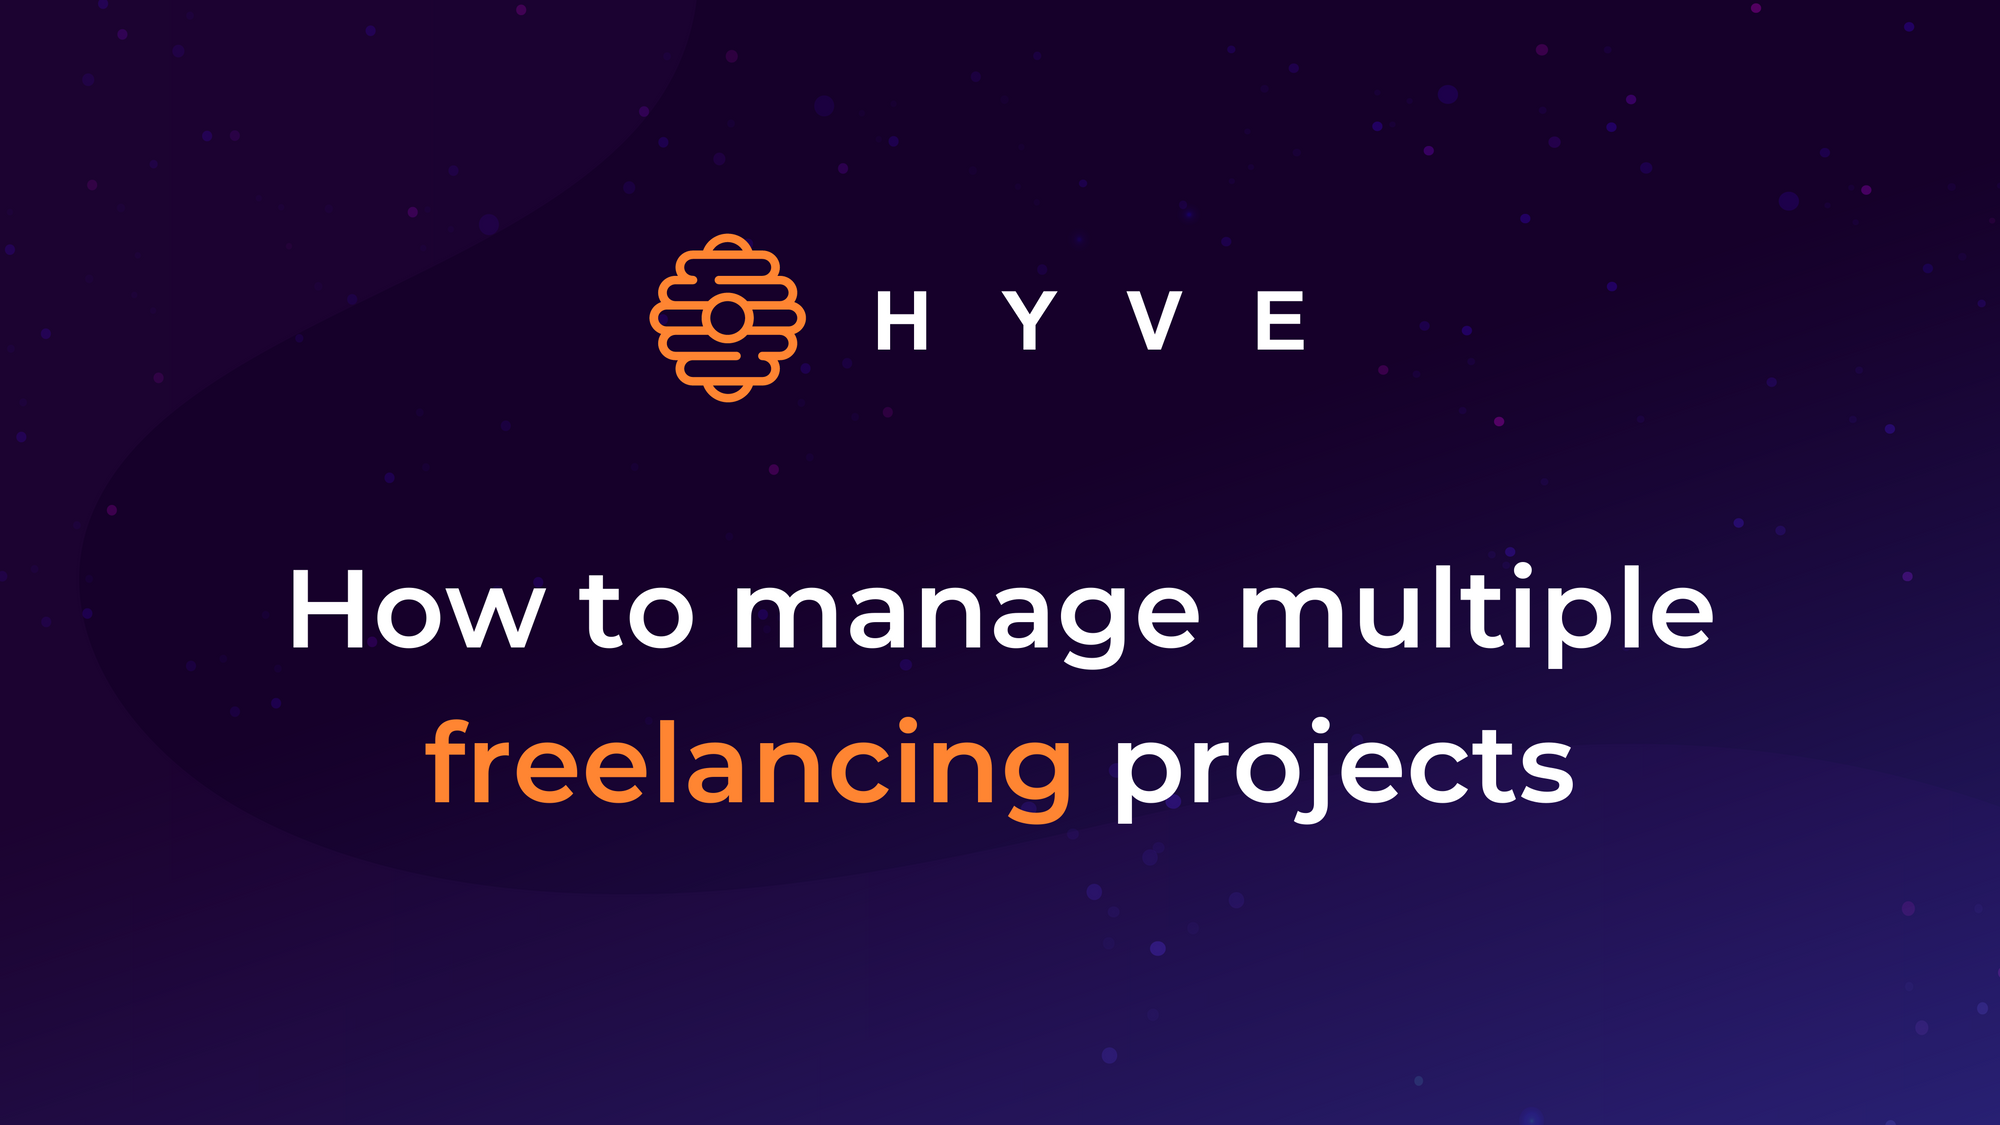 How to manage multiple freelancing projects